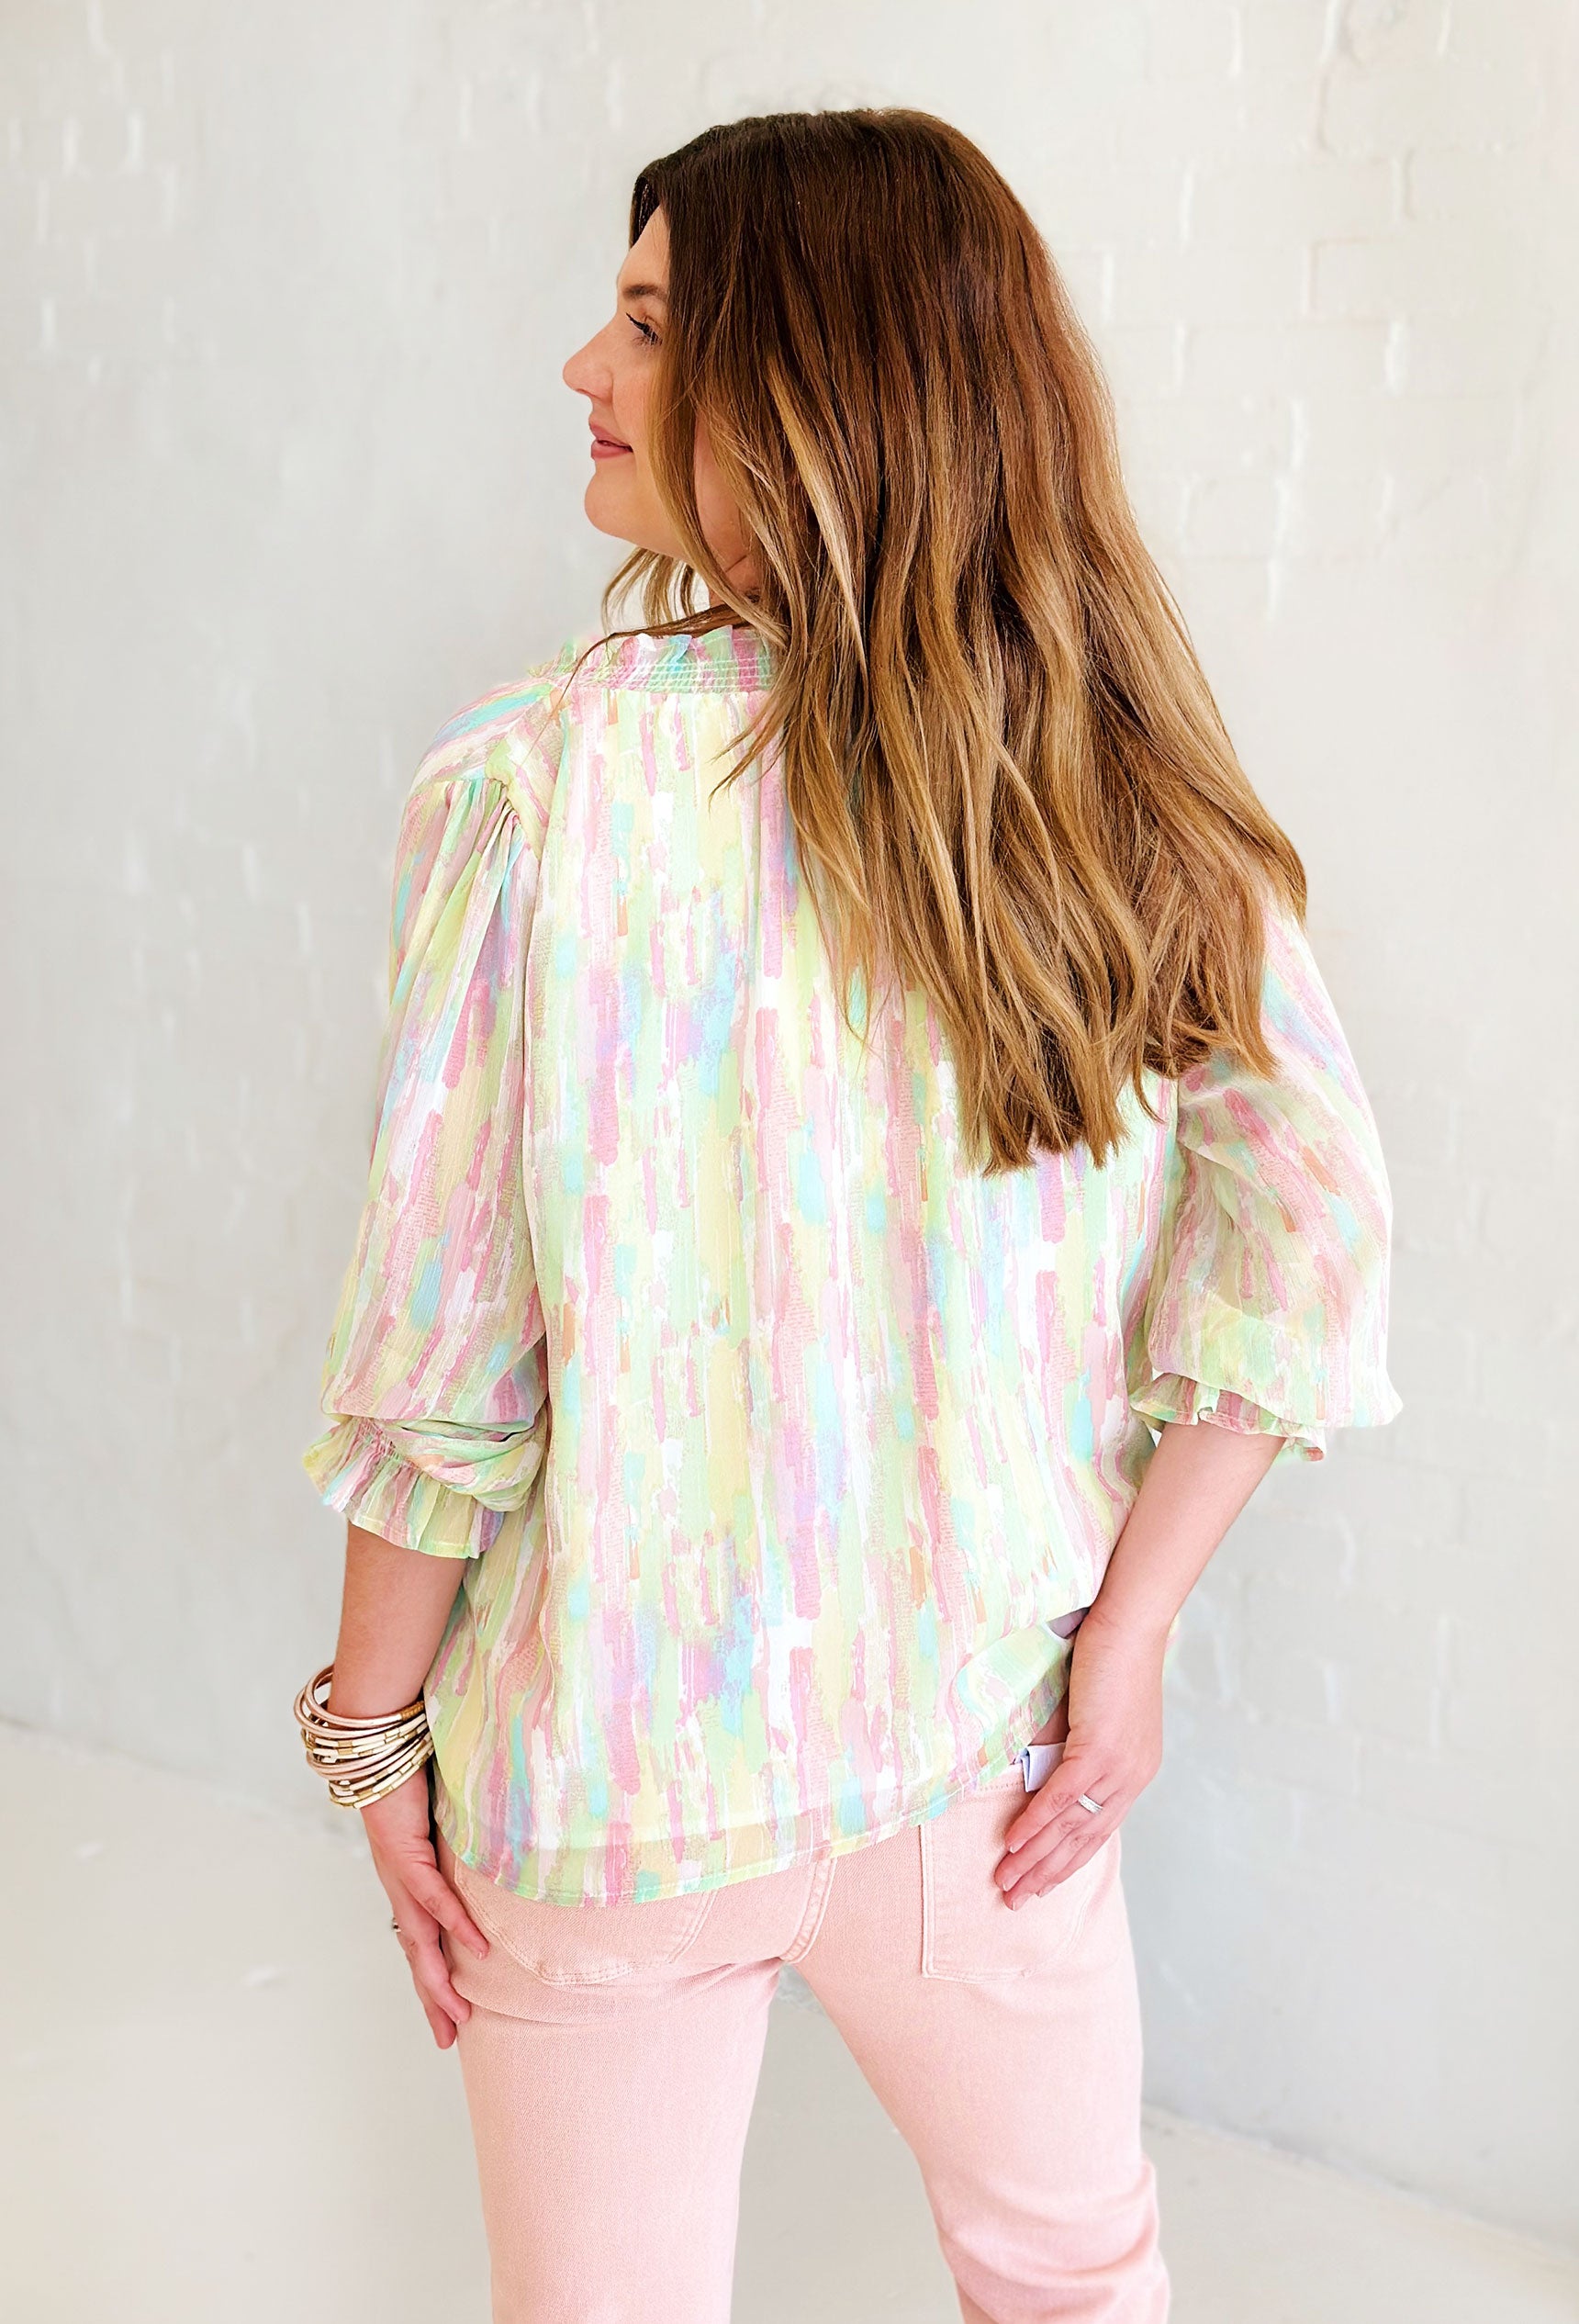 Somebody To Love Blouse, brush stroke design, pink green and blue, buttoned up, 3/4 sleeves with smocking